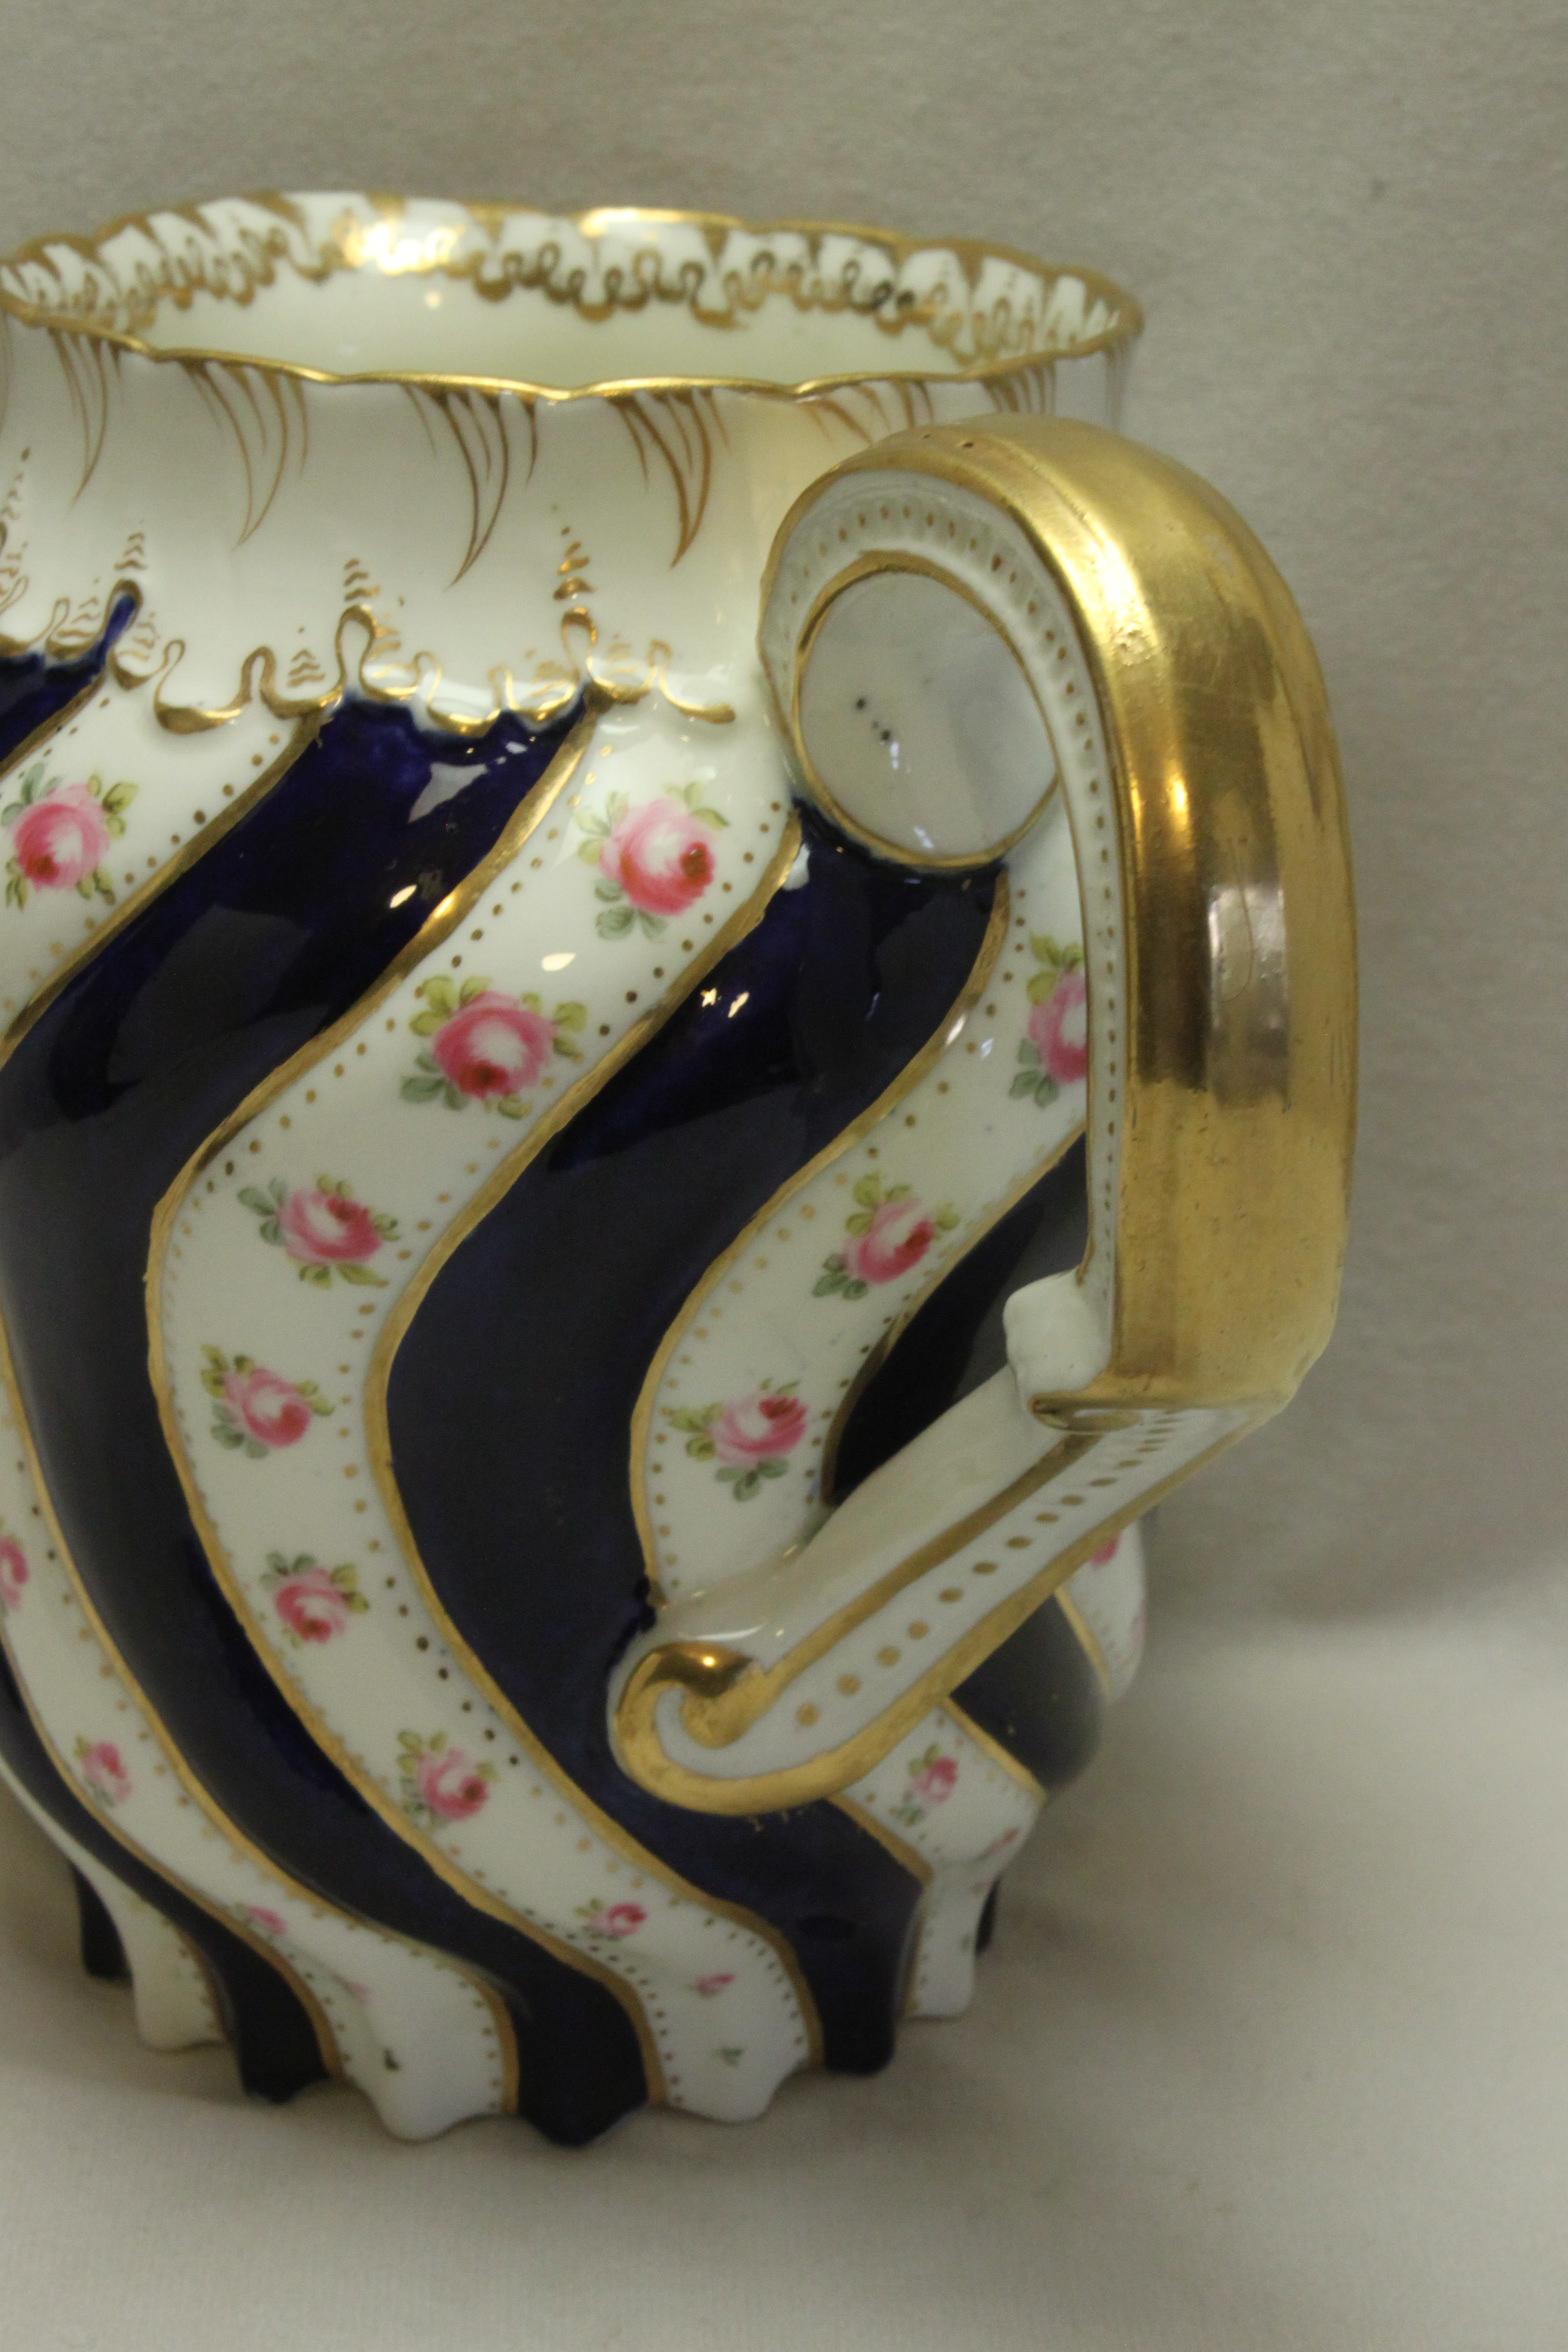 This very attractive, good quality porcelain hot water jug by George Jones & Co. is decorated with alternating flutes of hand painted roses and cobalt blue. It has then been finished off with delicate hand gilding. The shanked and gilded handle also